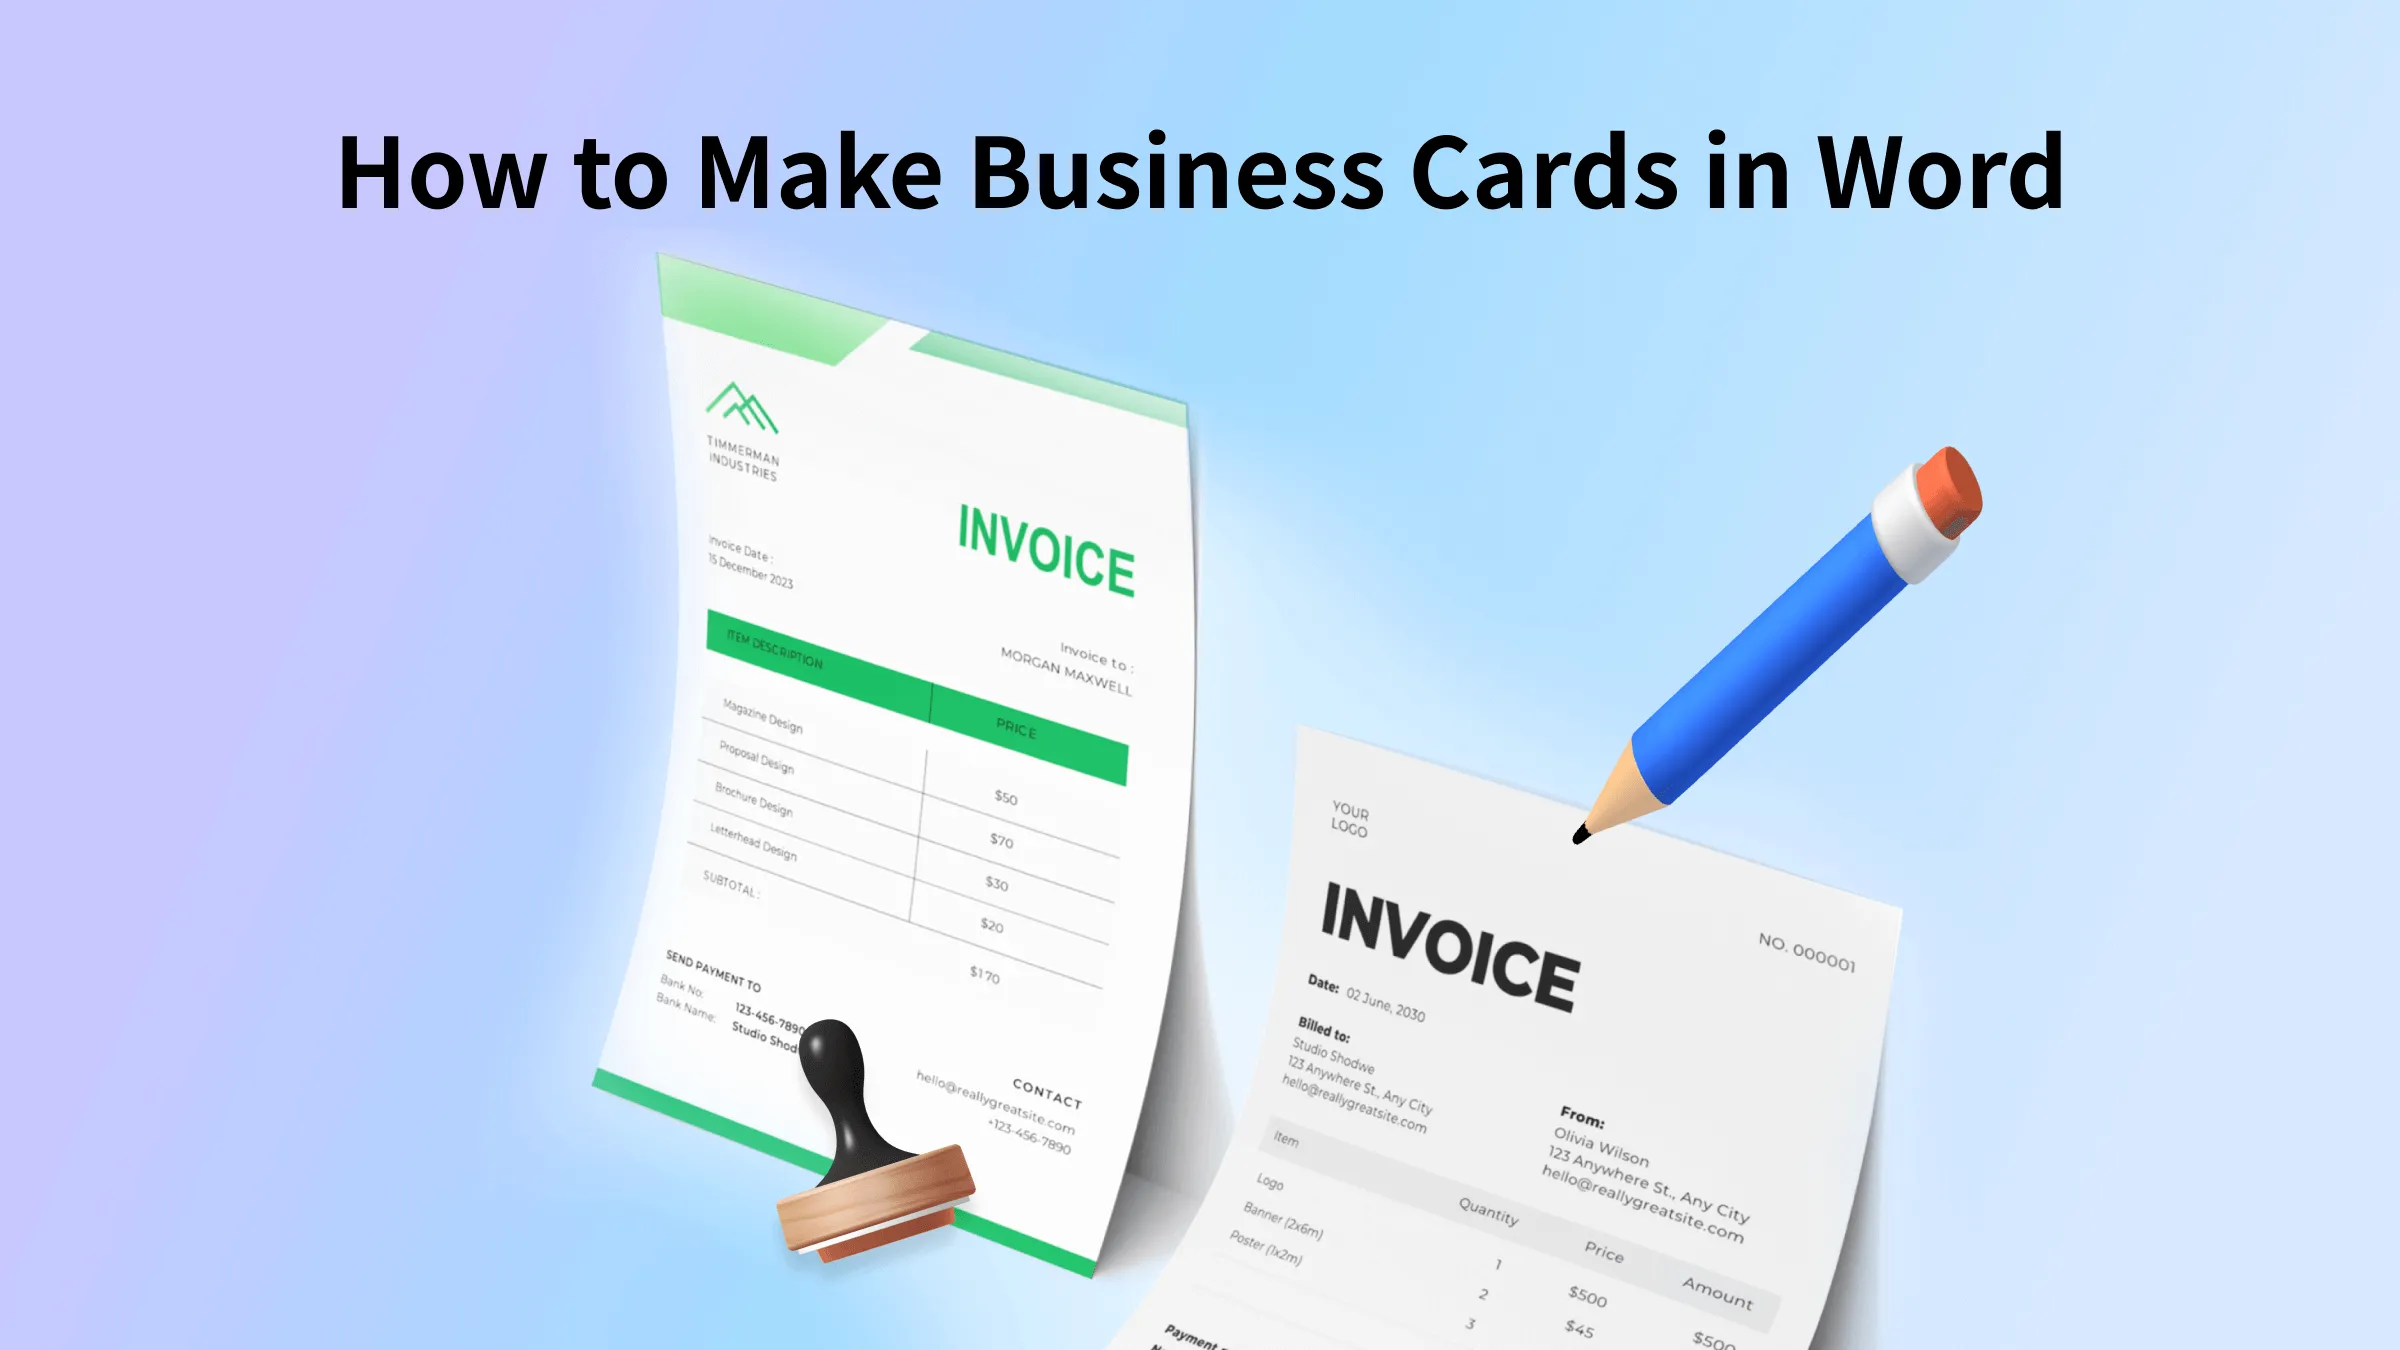 Make Business Cards in Word With Simple Steps